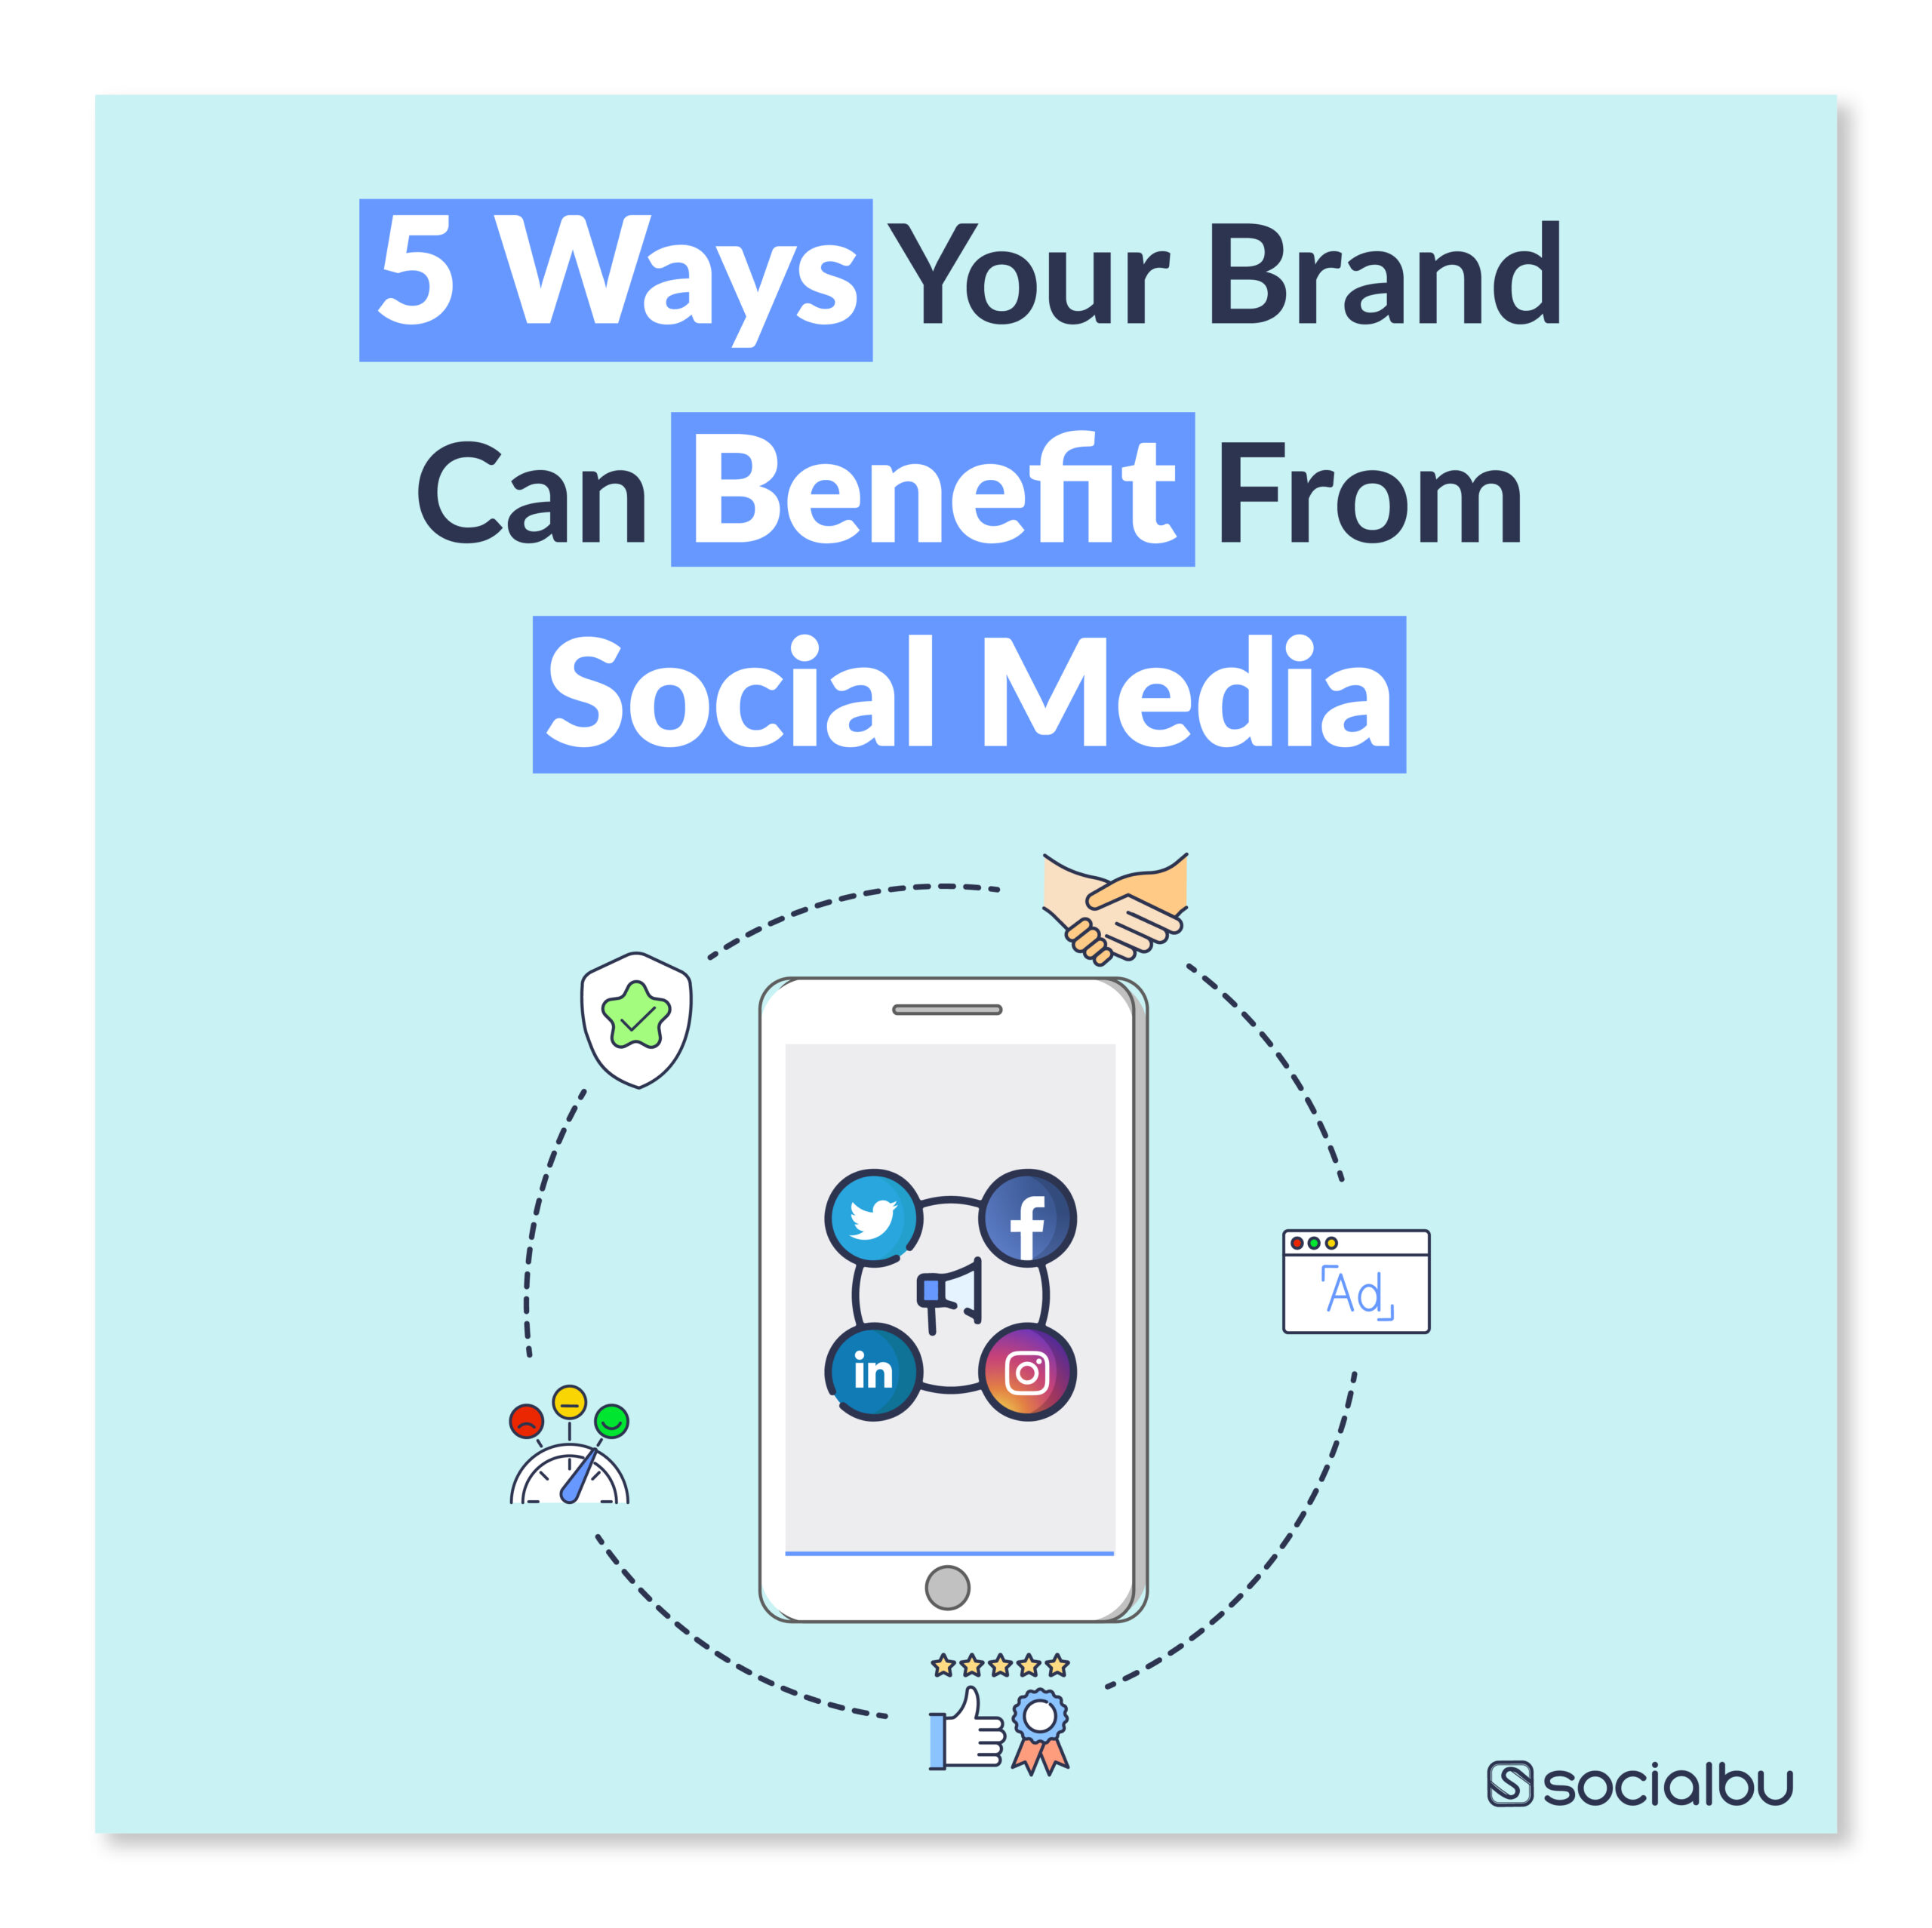 Brands can benefits from social media